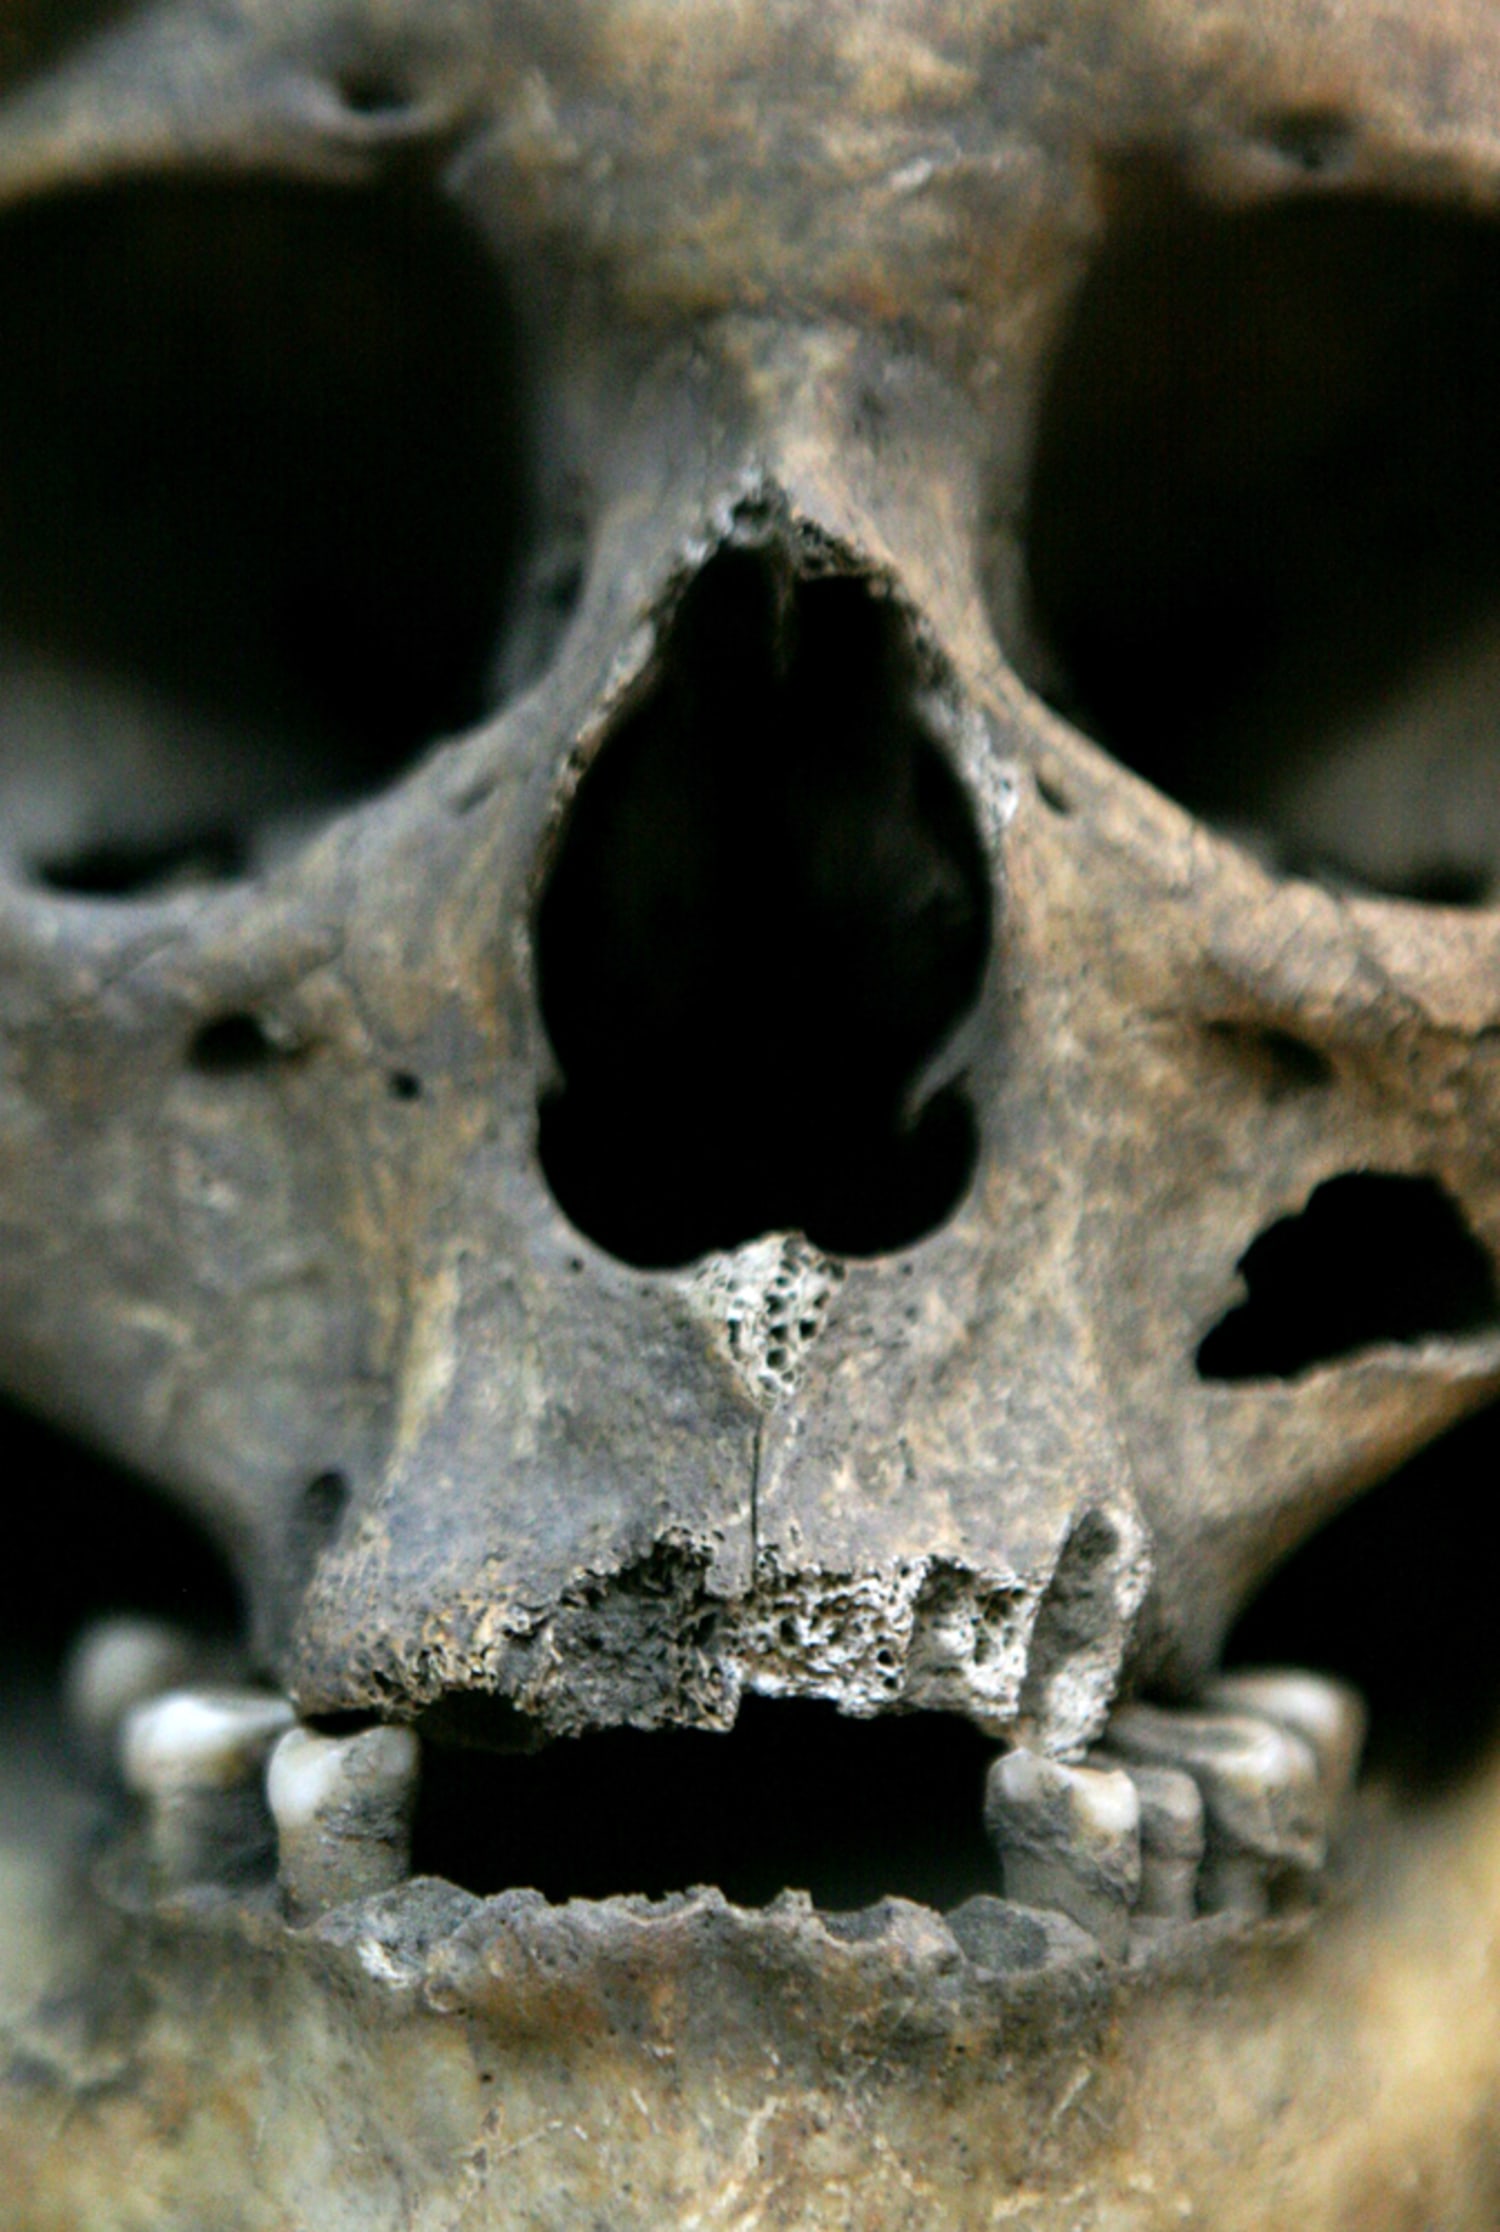 Fleshing Out Skull & Bones: Investigations into America's Most